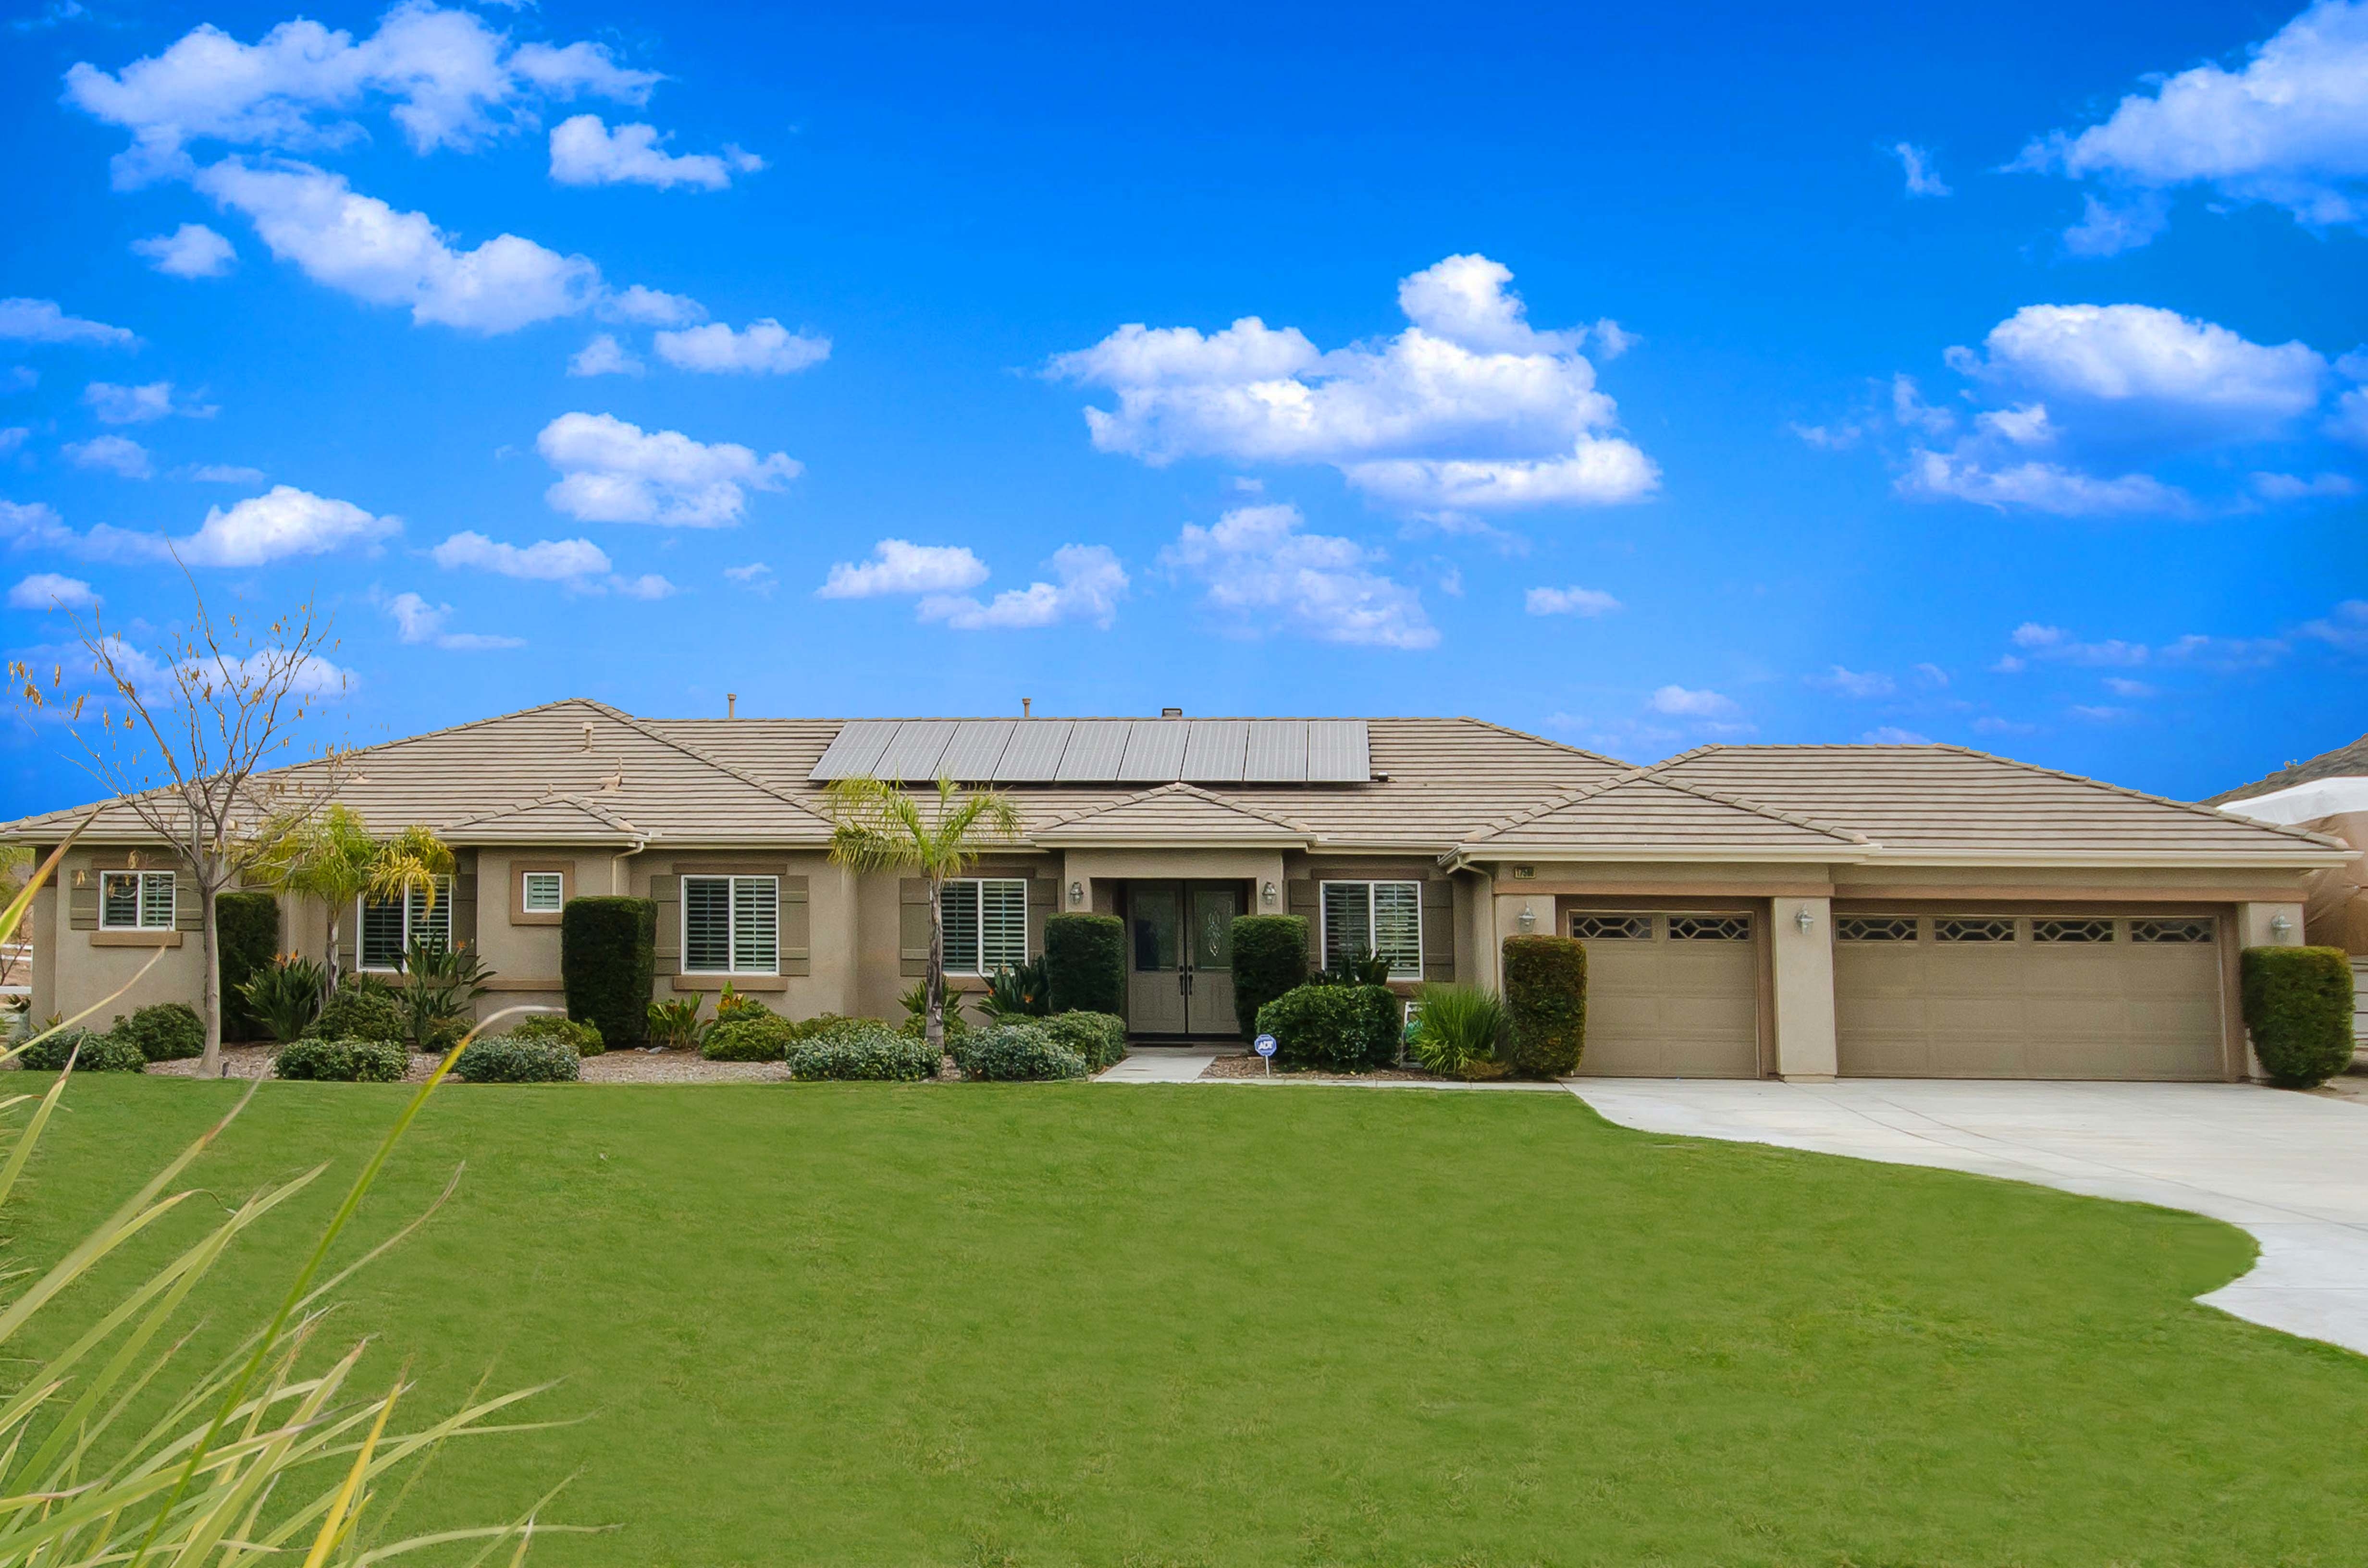 Just Listed!  Shows like a Model. 5 bdrm., 3ba., 3,295 sq. ft., 2.76 Acre in Gavilan Springs Ranch Estate  by Denise Gentile Coldwell Banker Associated Brokers Realty.  Call 951-751-1311 for more information.